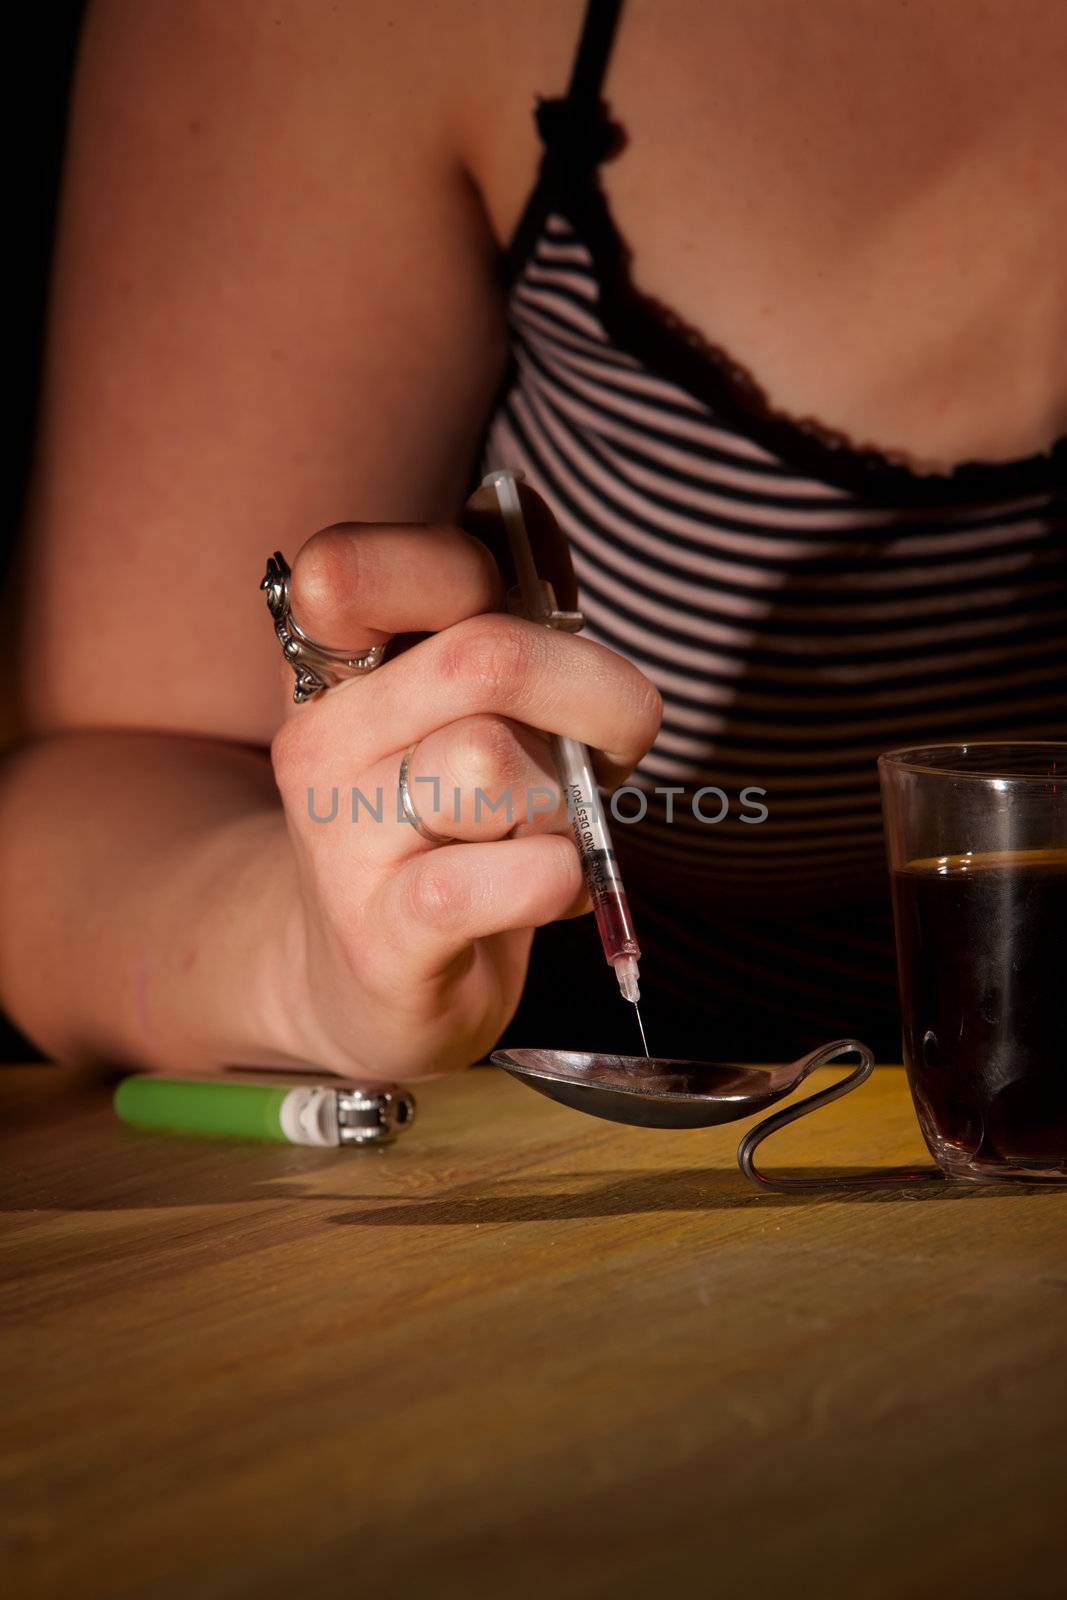 Closeup of woman's hand drawing black tar heroin into a needle